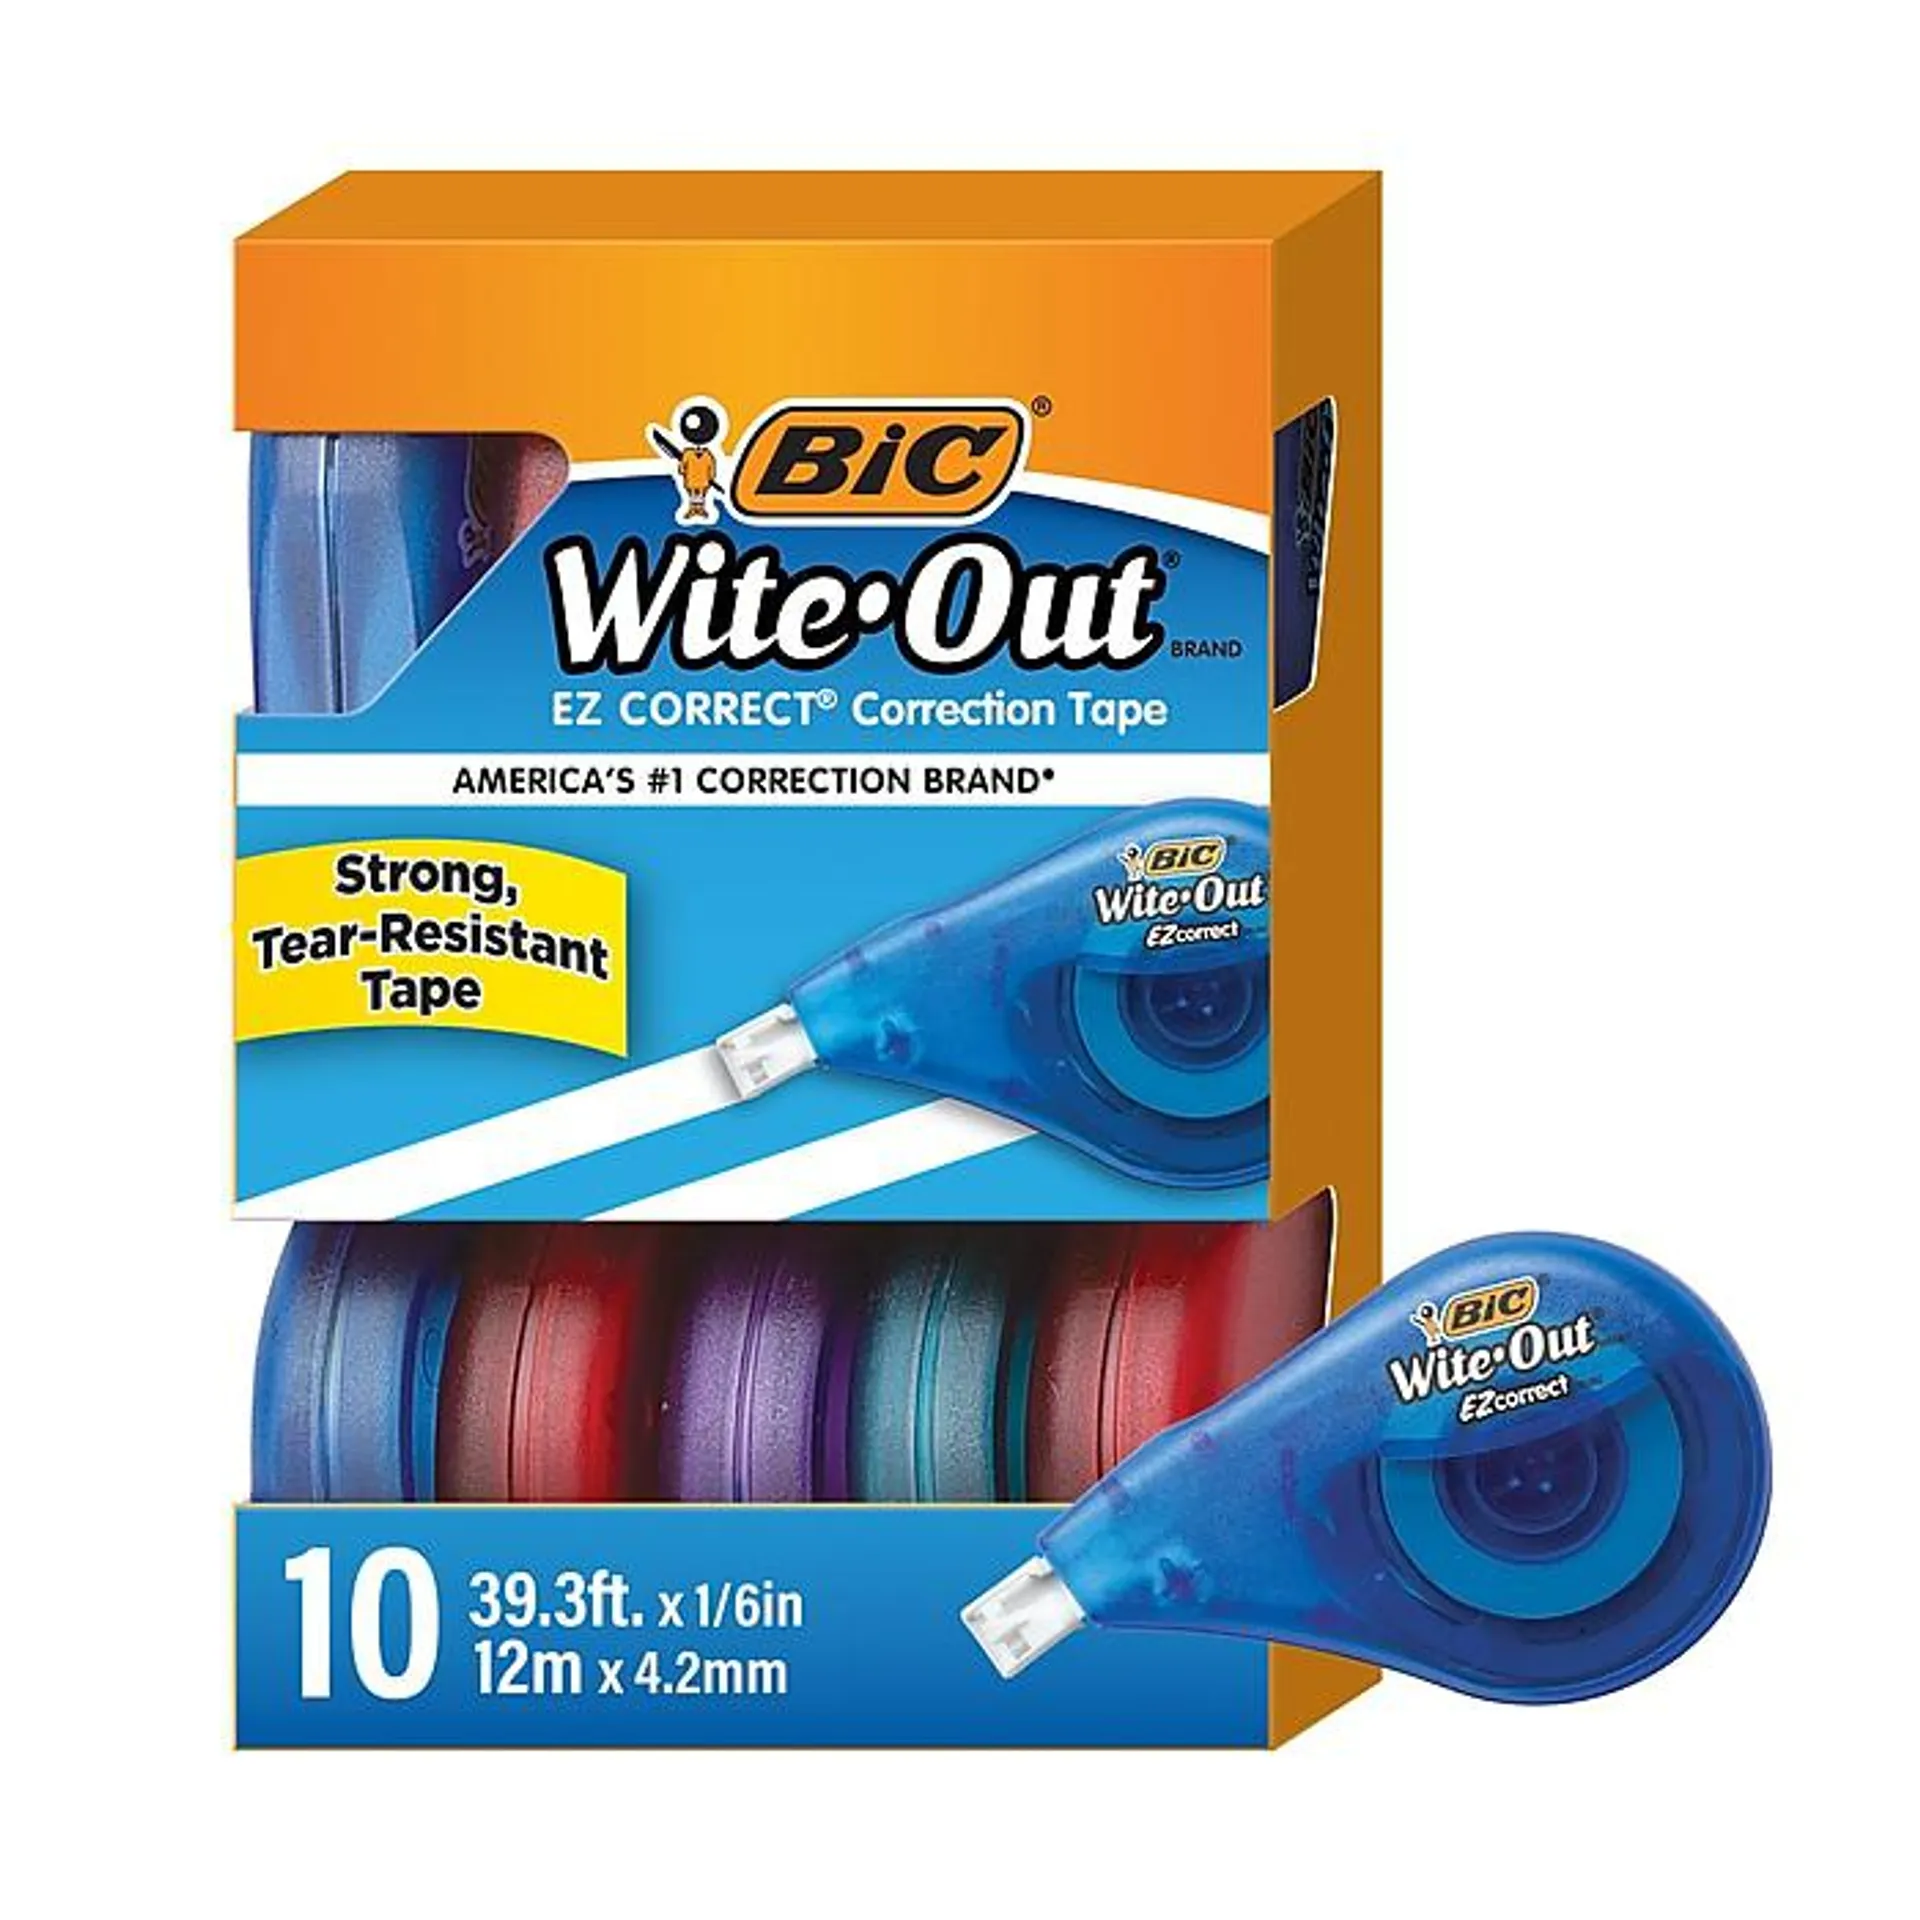 BIC Wite-Out EZ Correct Correction Tape,